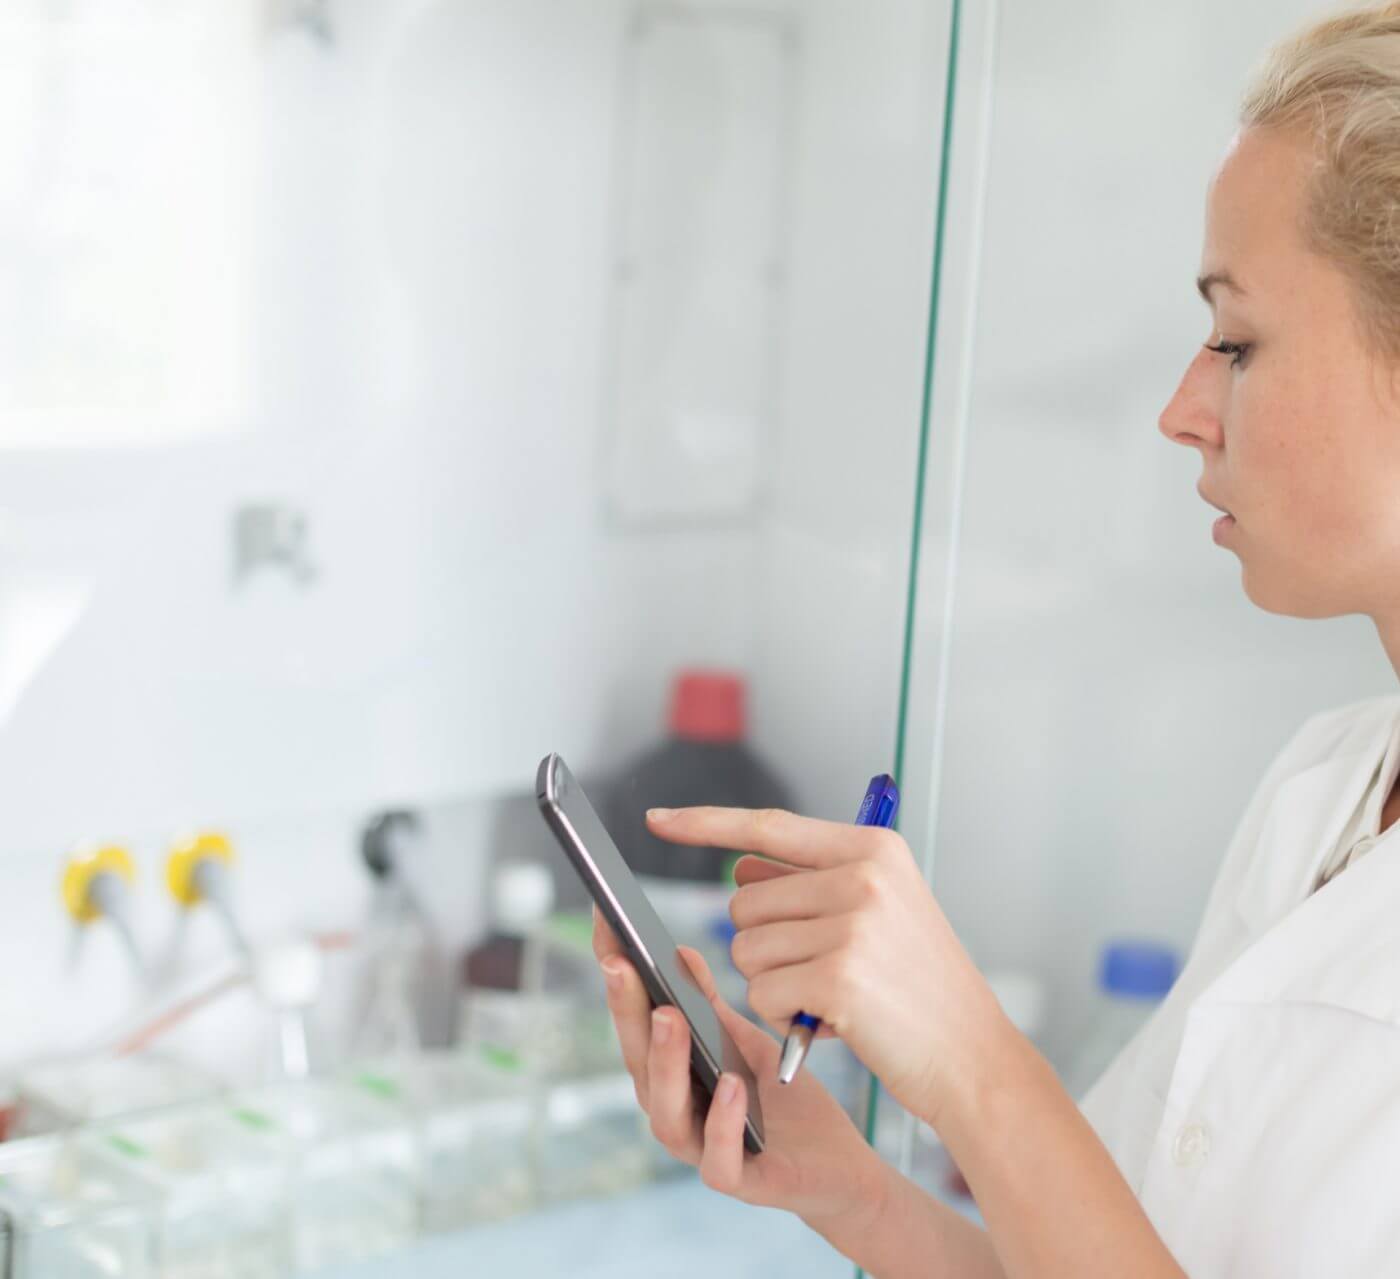 Woman Using Mobile Phone to Track Assets in Lab